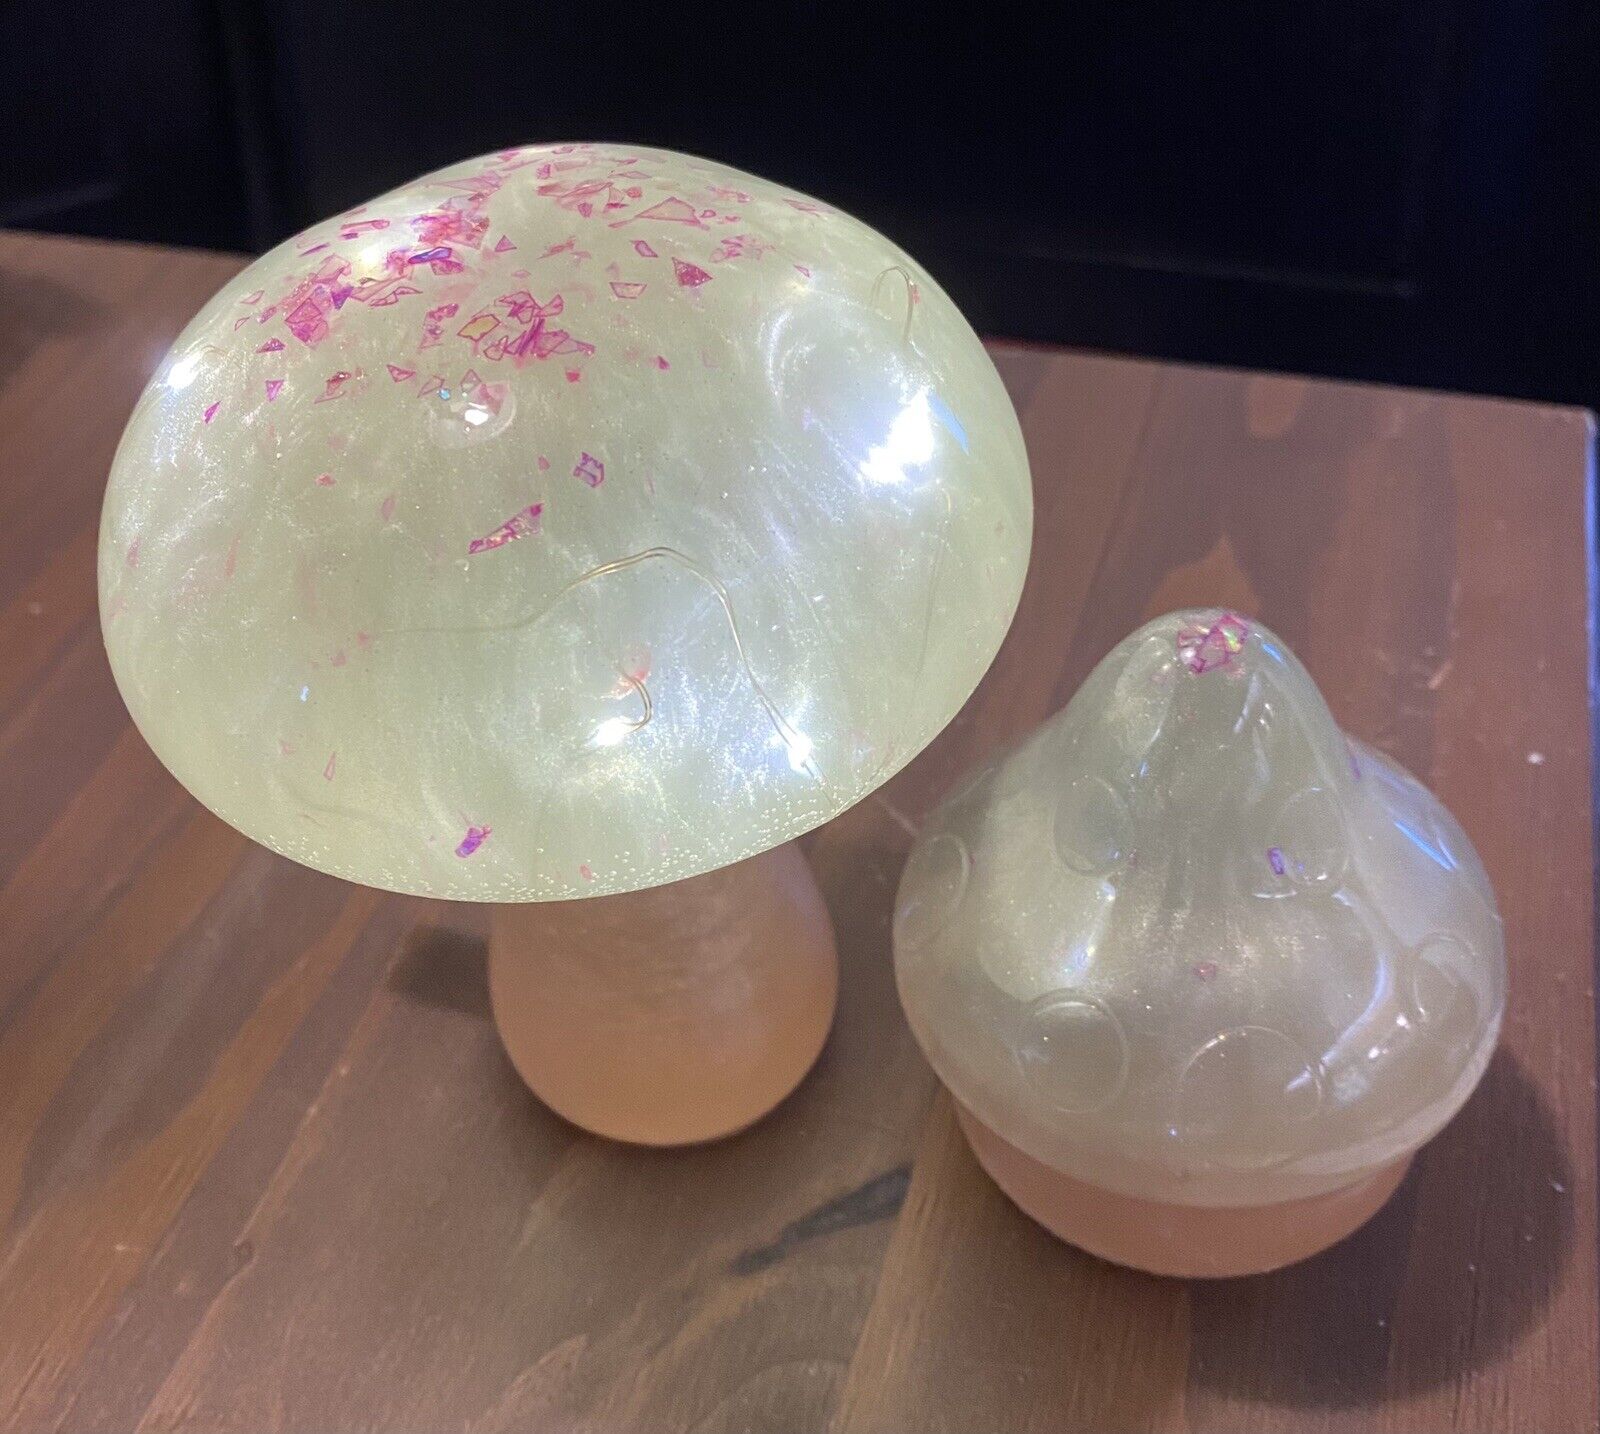 New, Unique, One Of A Kind, Large And Medium Mushroom Set, Lighted Made Of Resin